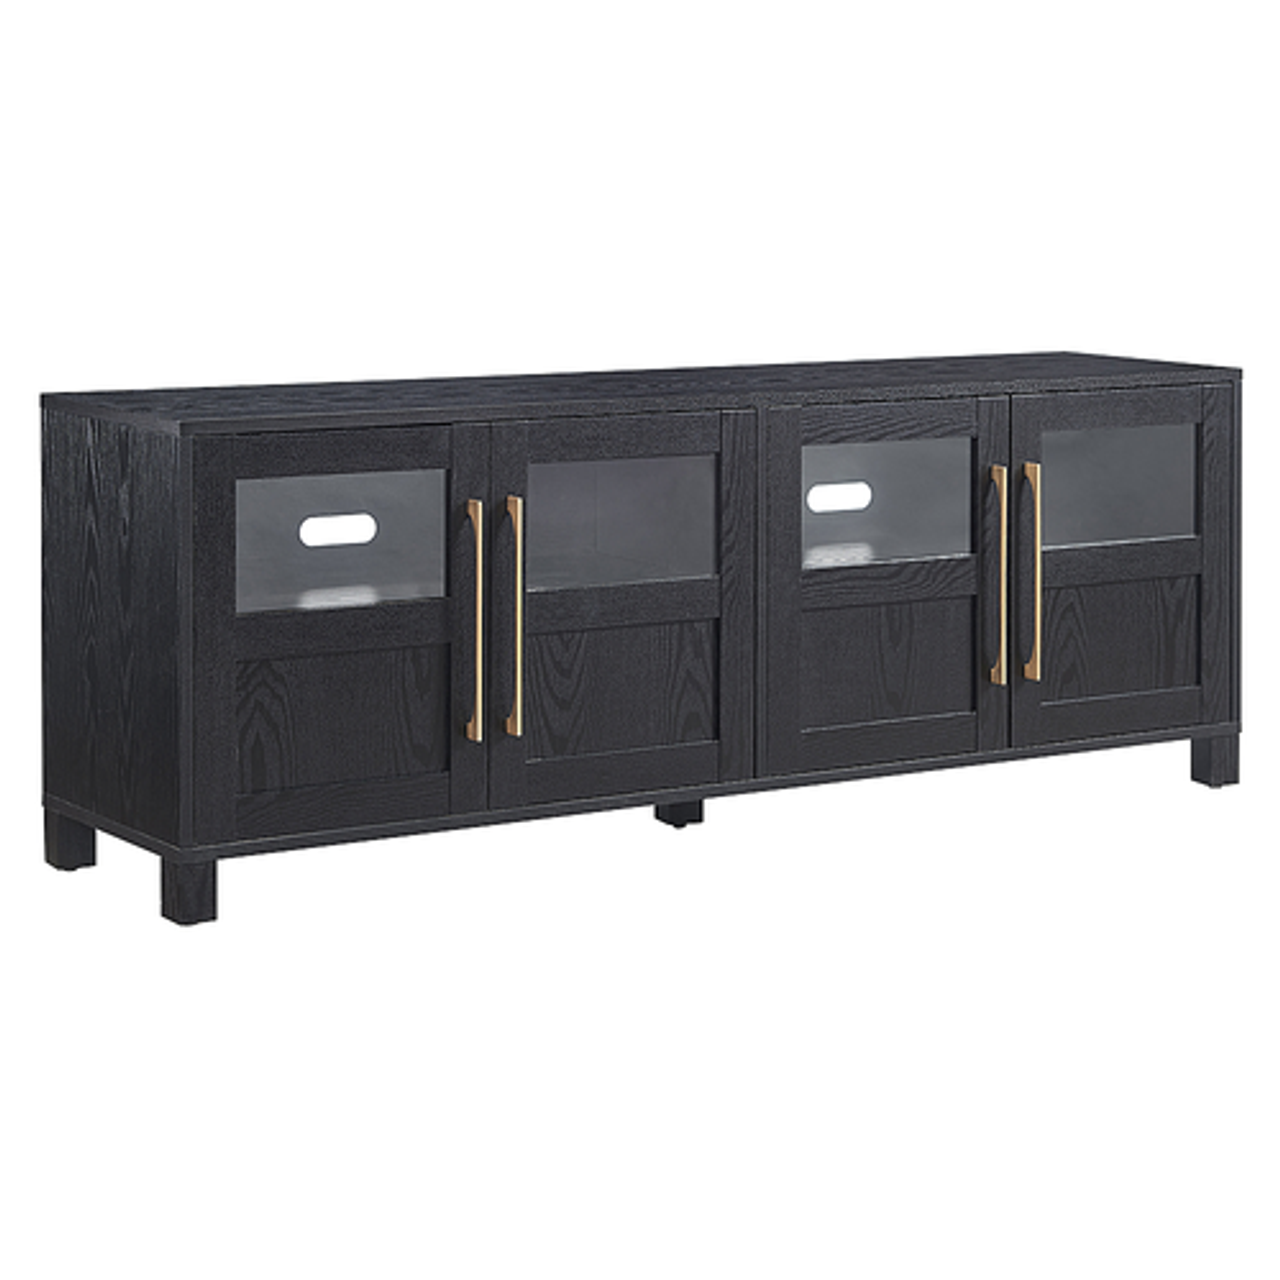 Camden&Wells - Holbrook TV Stand for Most TVs up to 75" - Black Grain